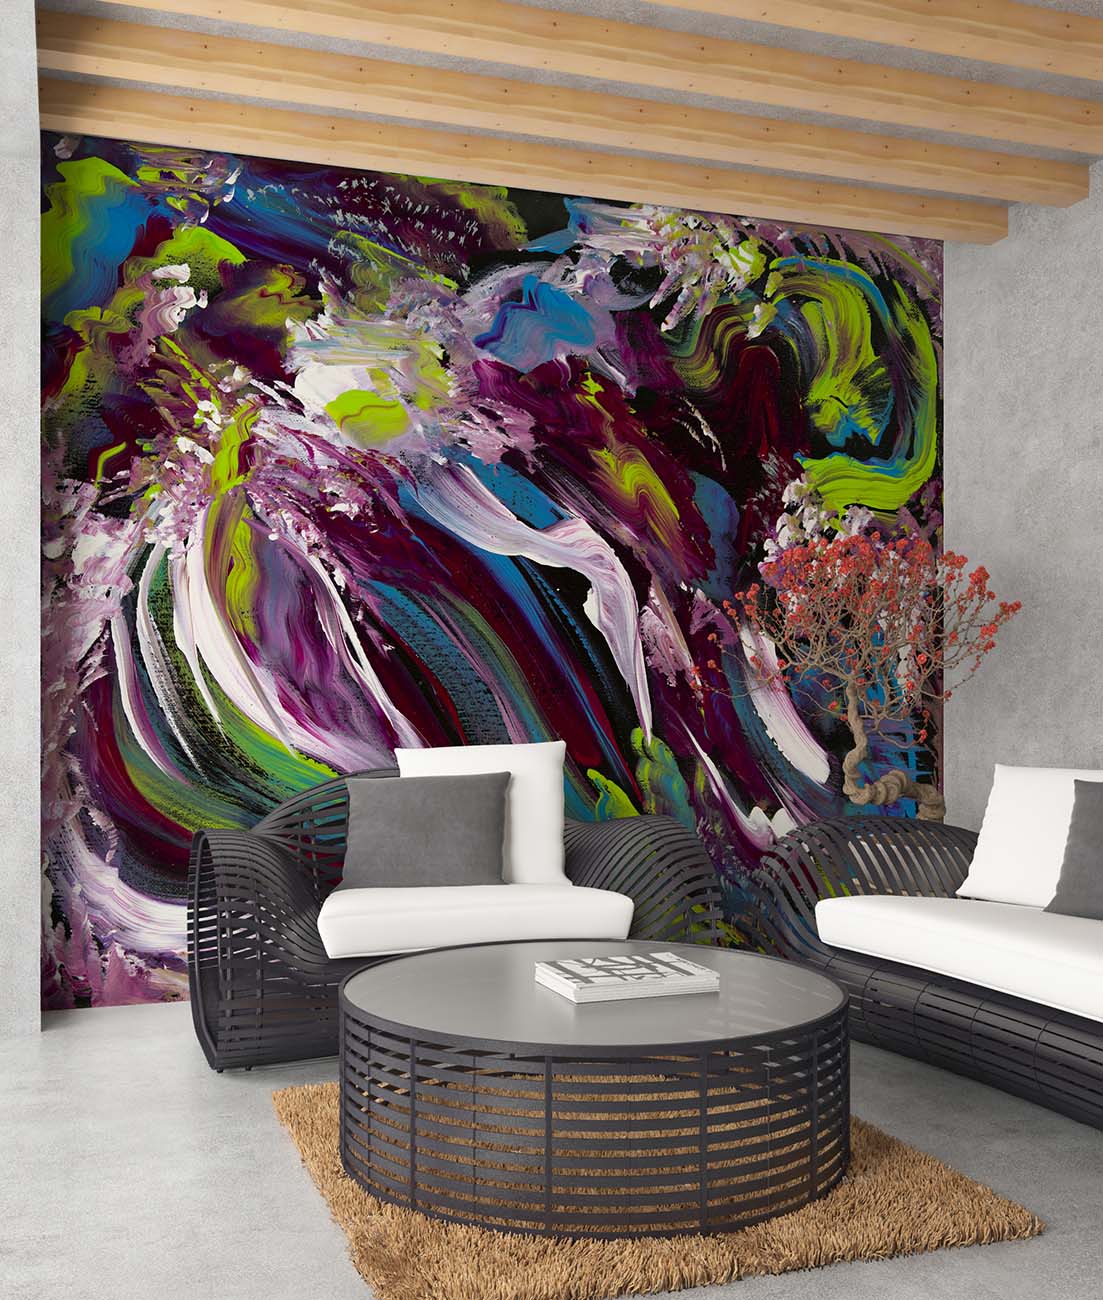 Zivid abstract art by Doug LaRue as a wall mural in front of metal couches